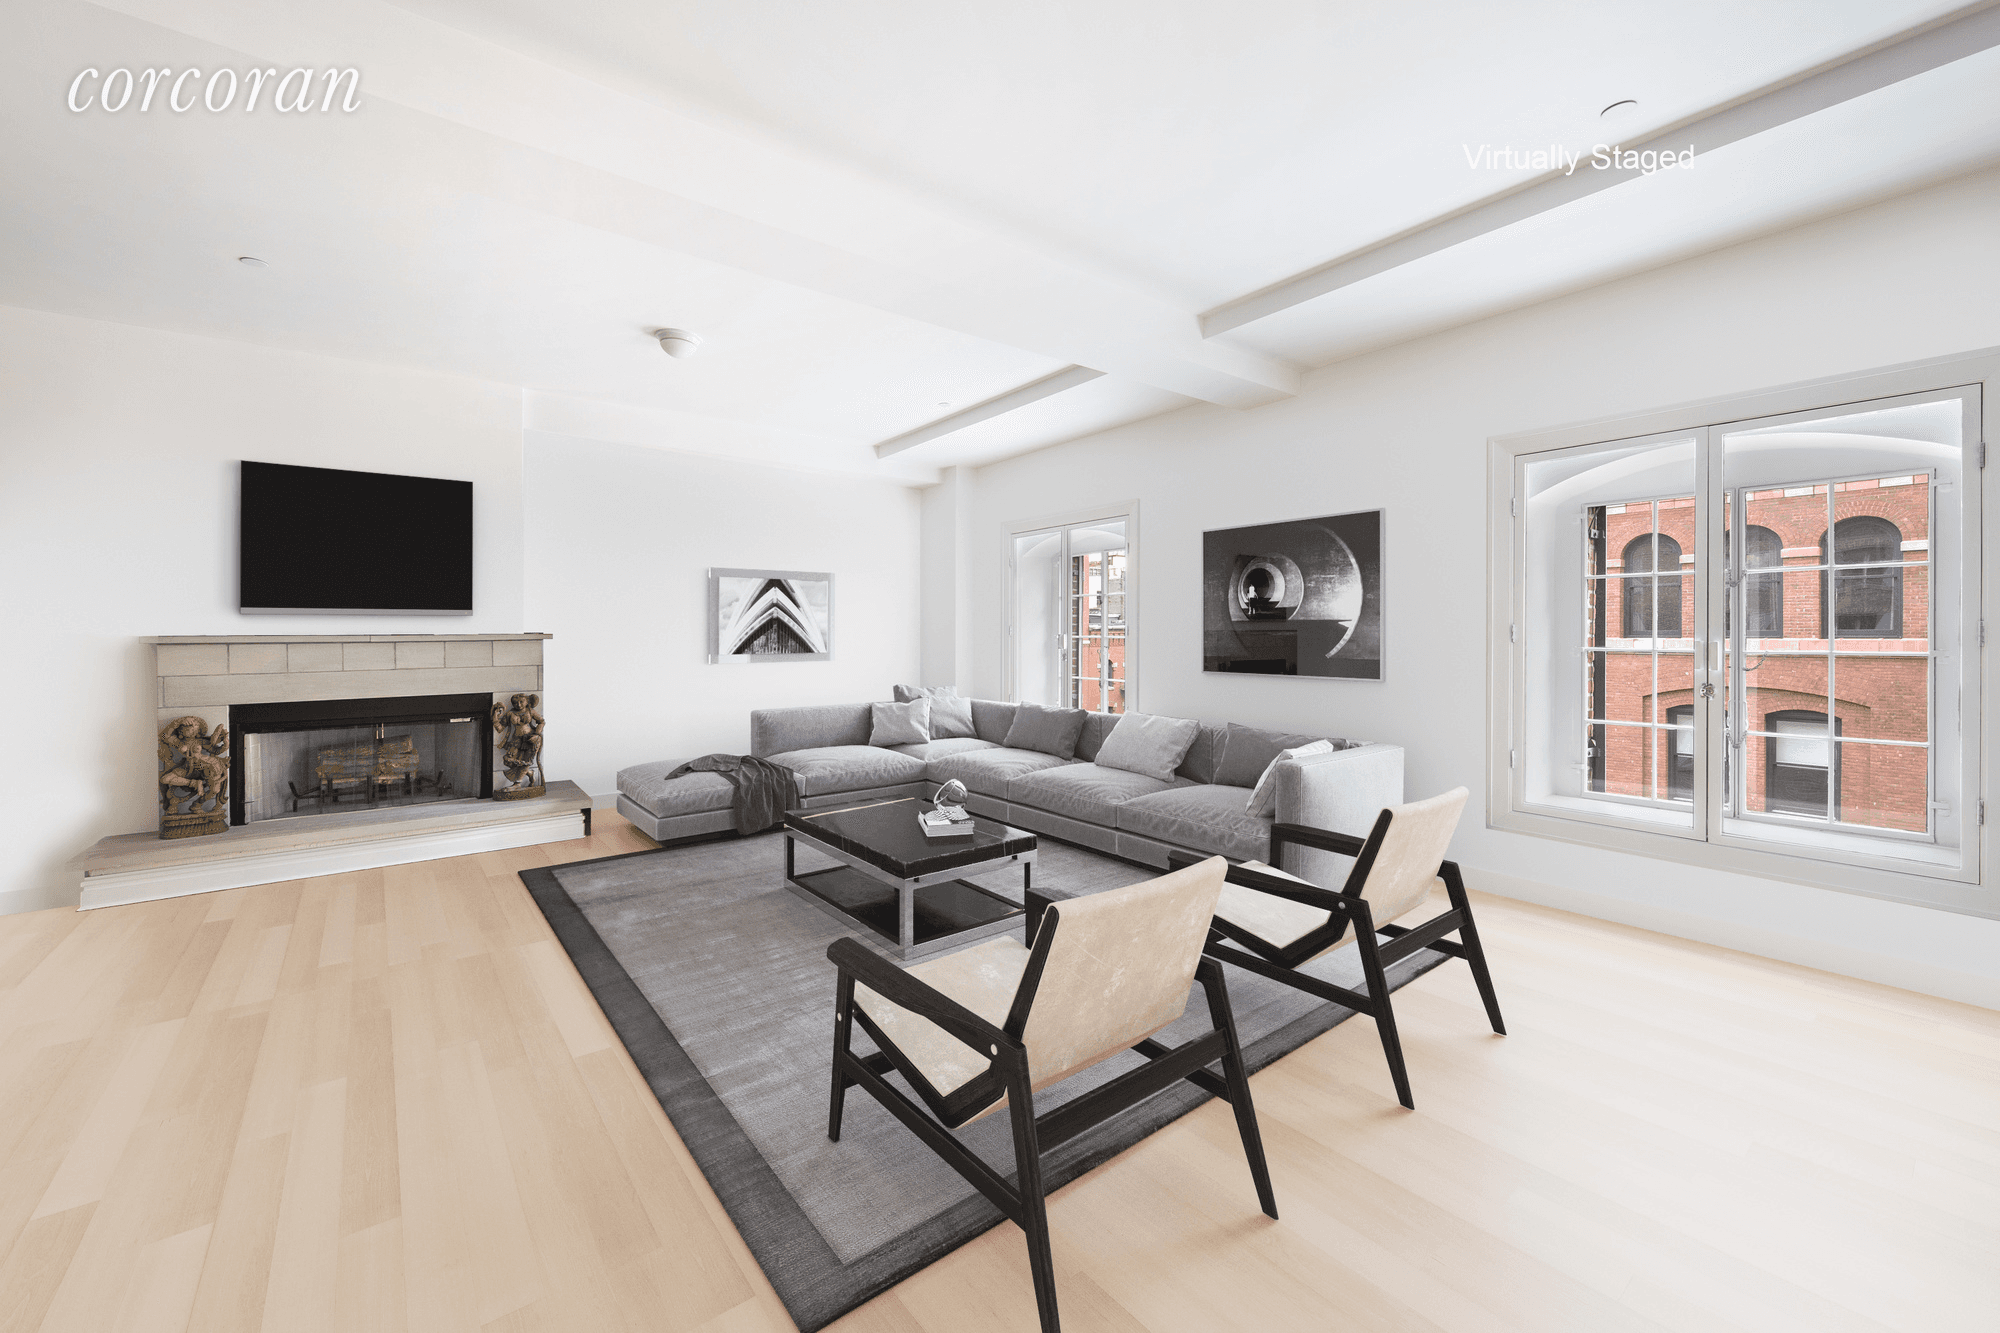 Spectacular Tribeca penthouse triplex loft condominium with outdoor space, offers a quiet retreat from city life.